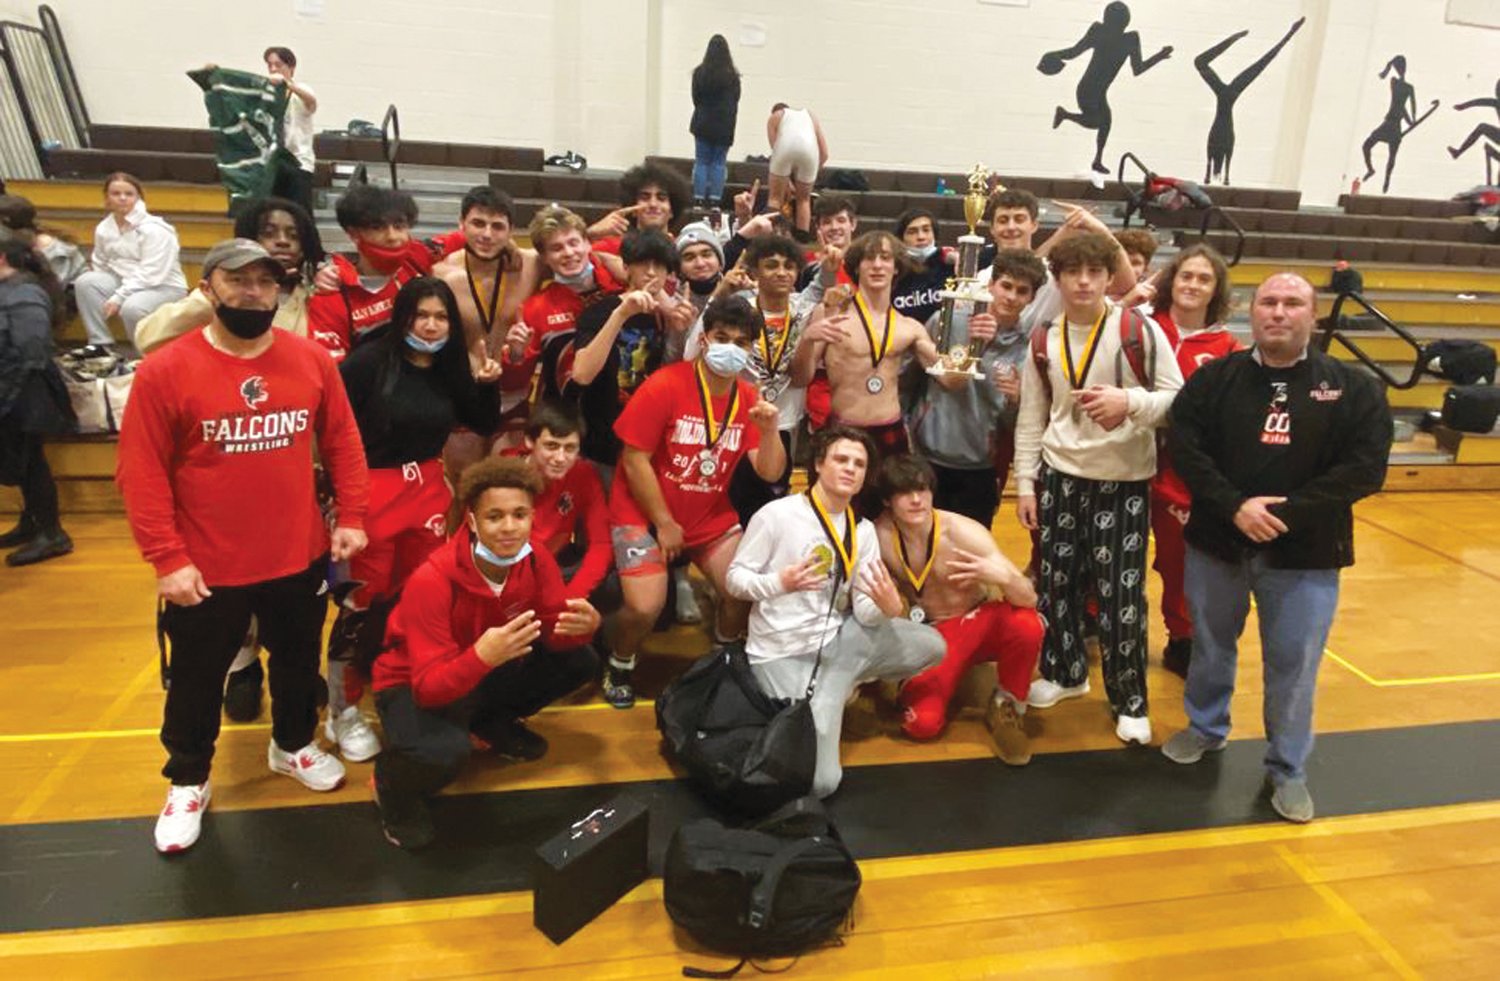 TOP DOGS: The Cranston West wrestling team after winning the Wilson Cup.